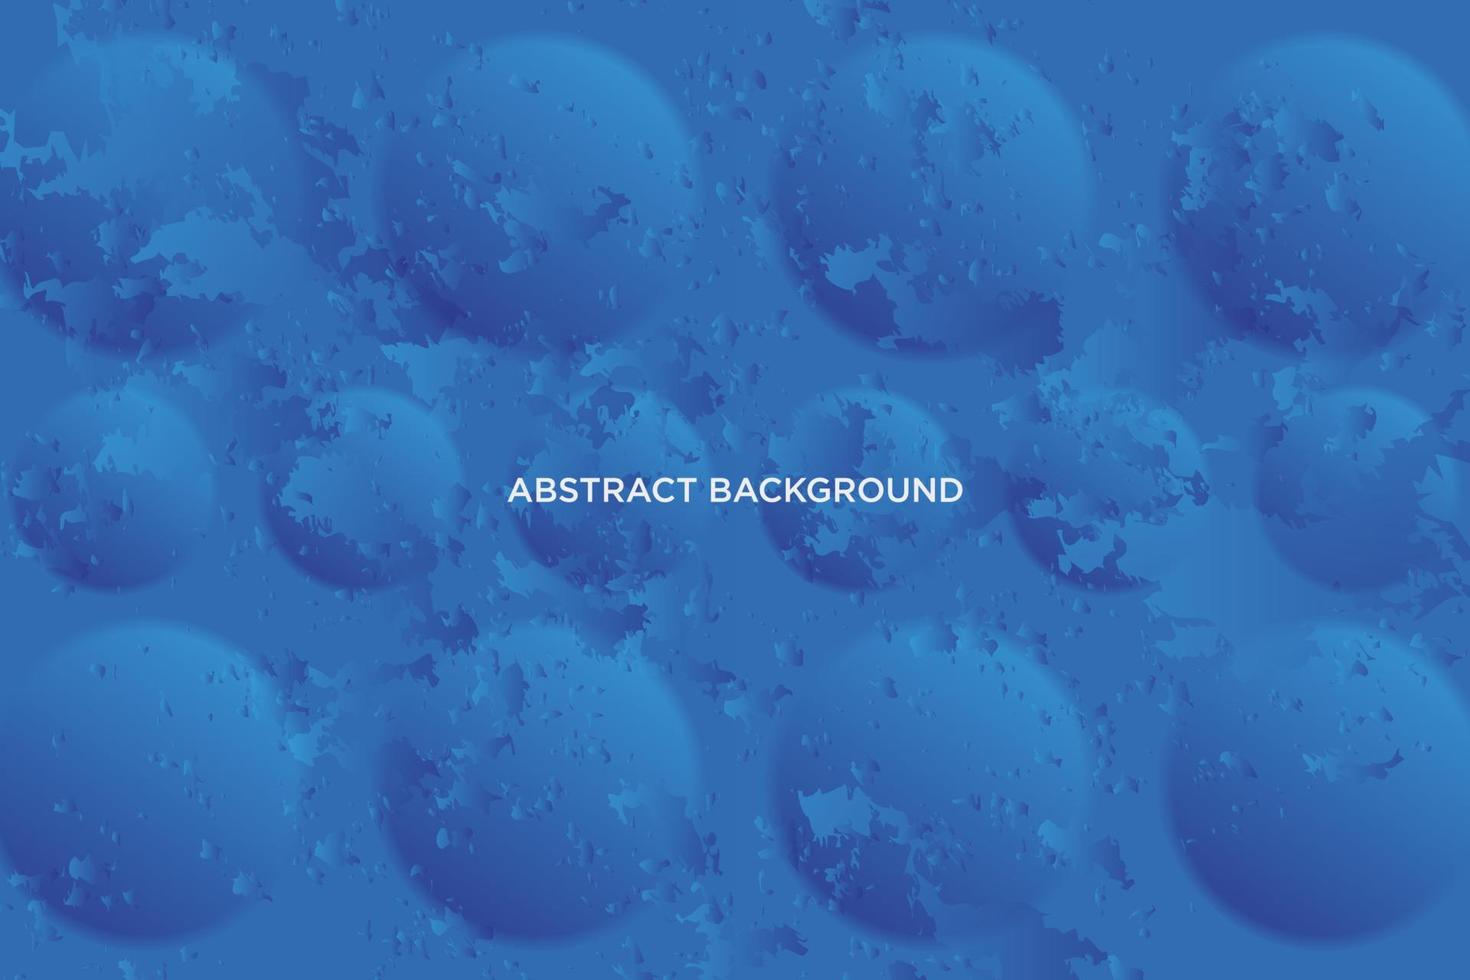 abstract background design free vector template.